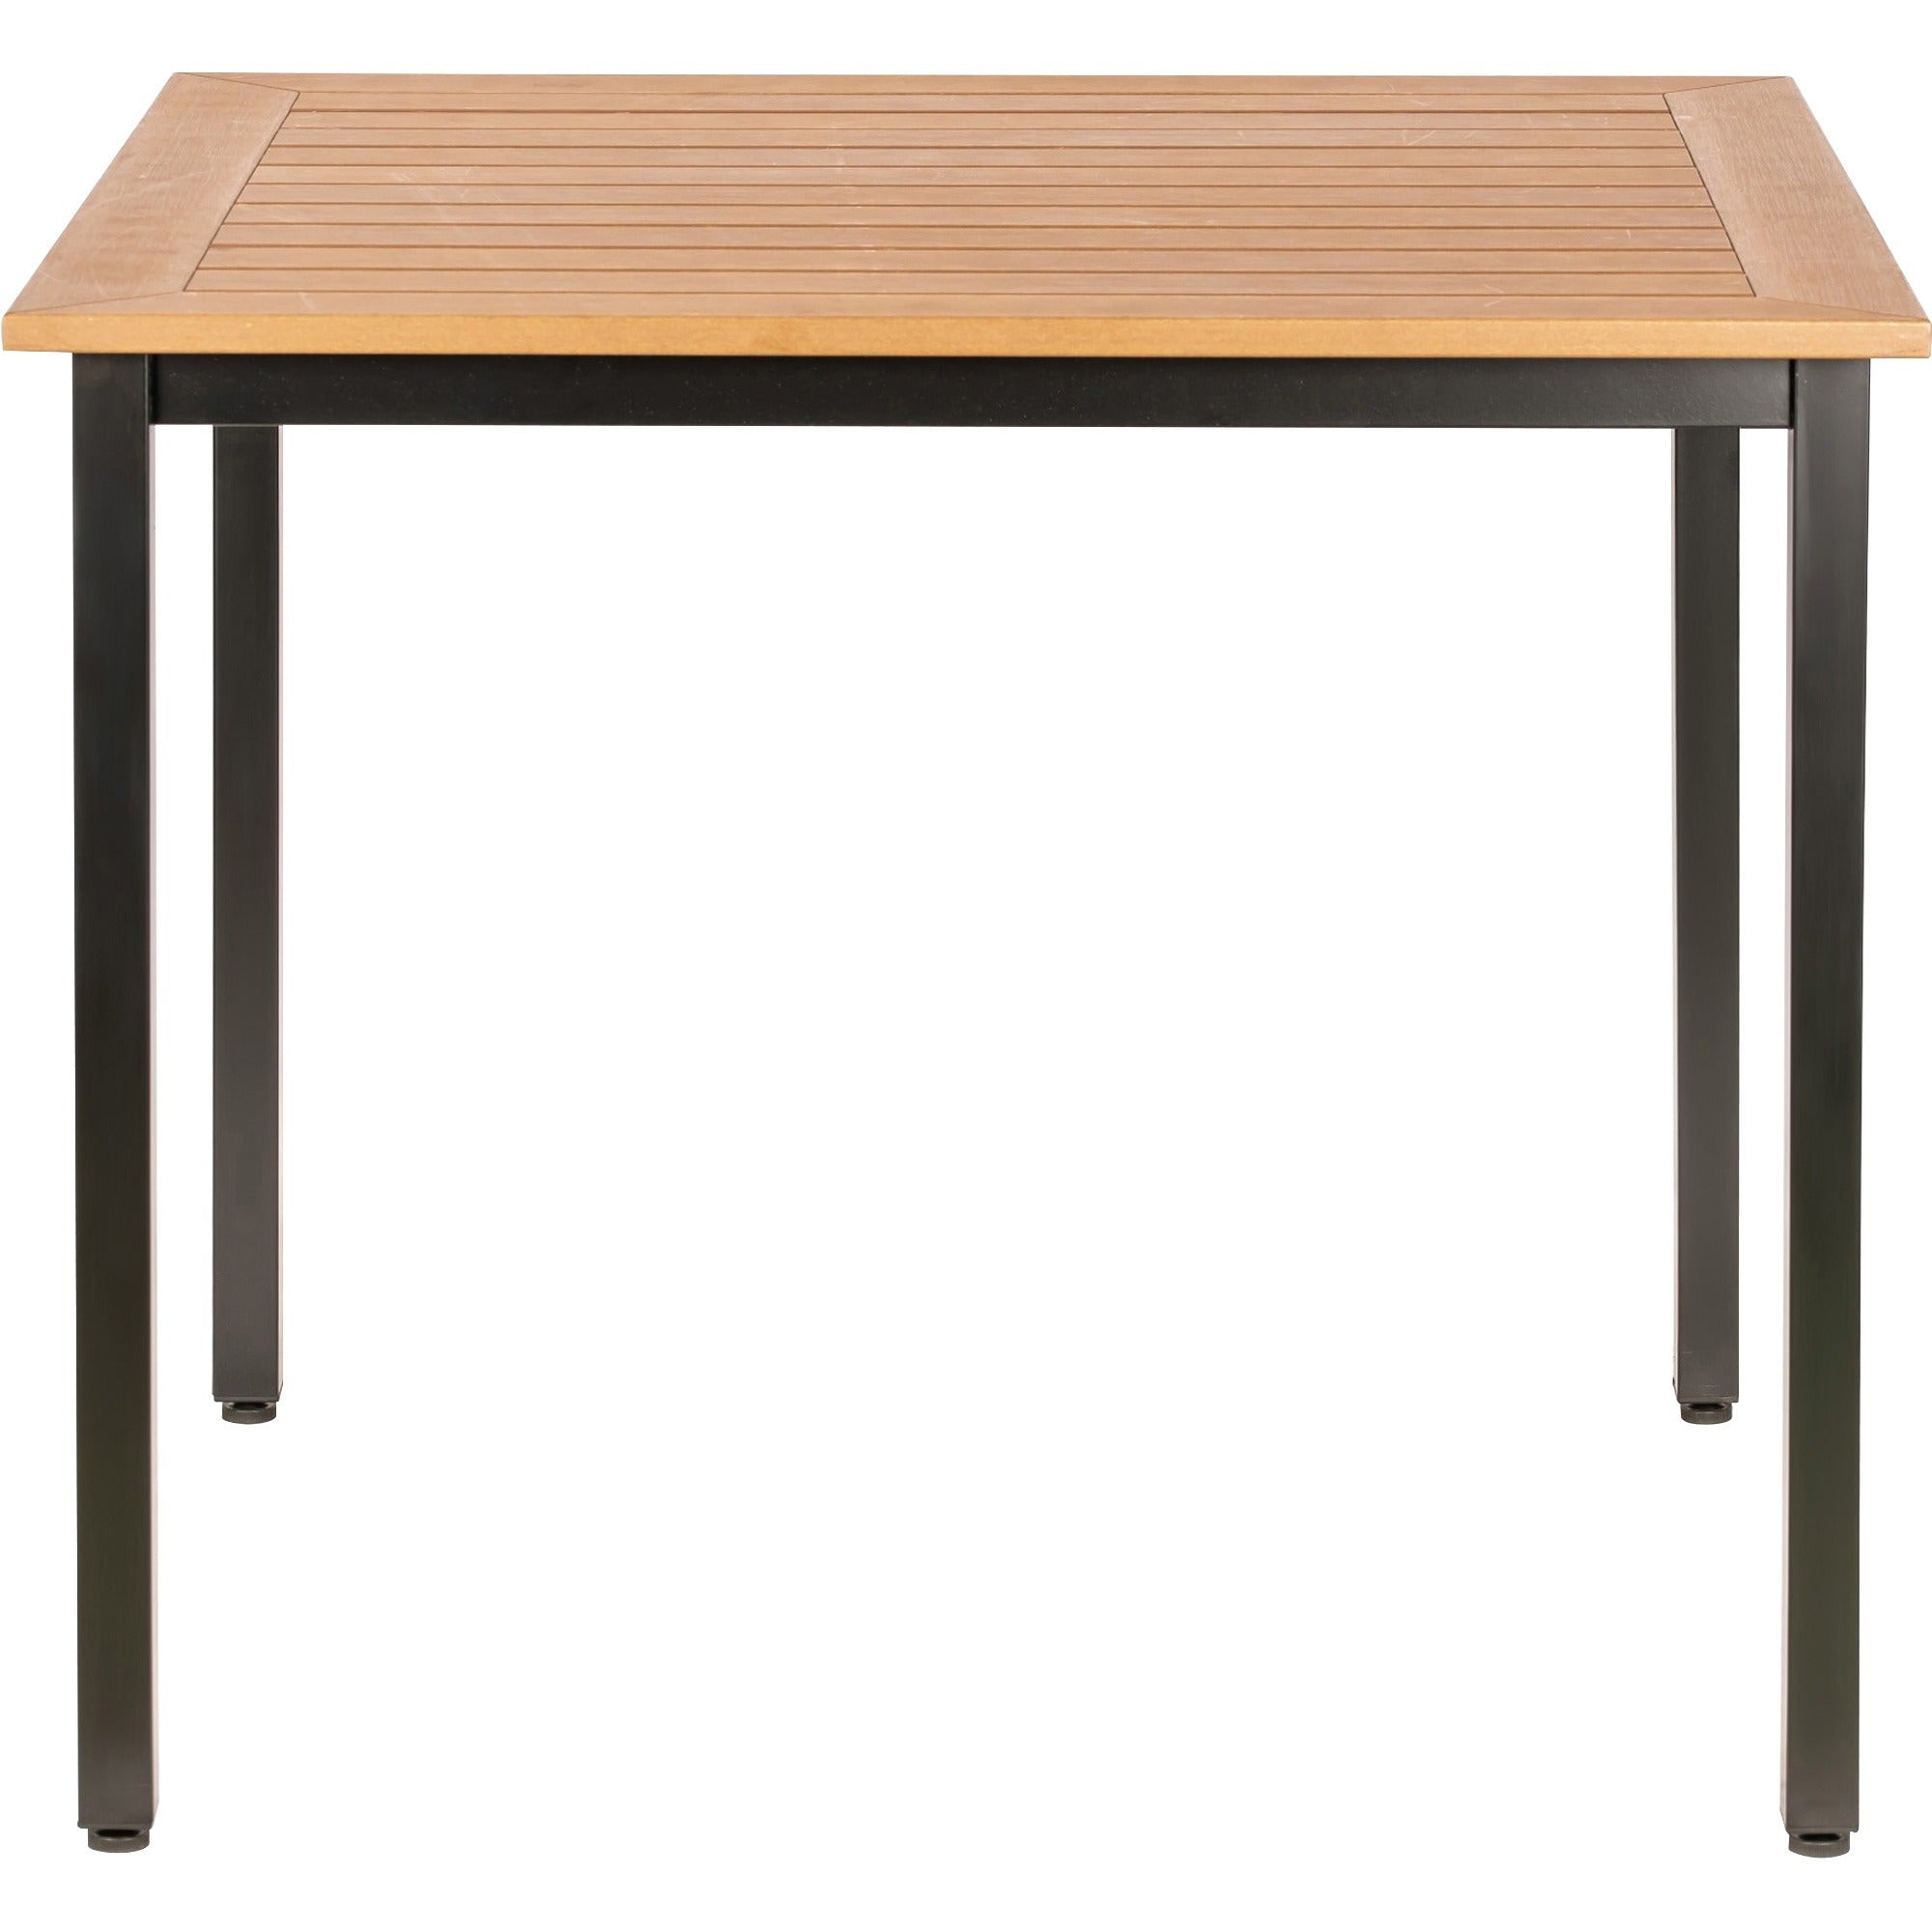 lorell-faux-wood-outdoor-table-for-table-topteak-square-top-black-four-leg-base-4-legs-3660-table-top-length-x-3660-table-top-width-3075-height-assembly-required-1-each_llr42684 - 3